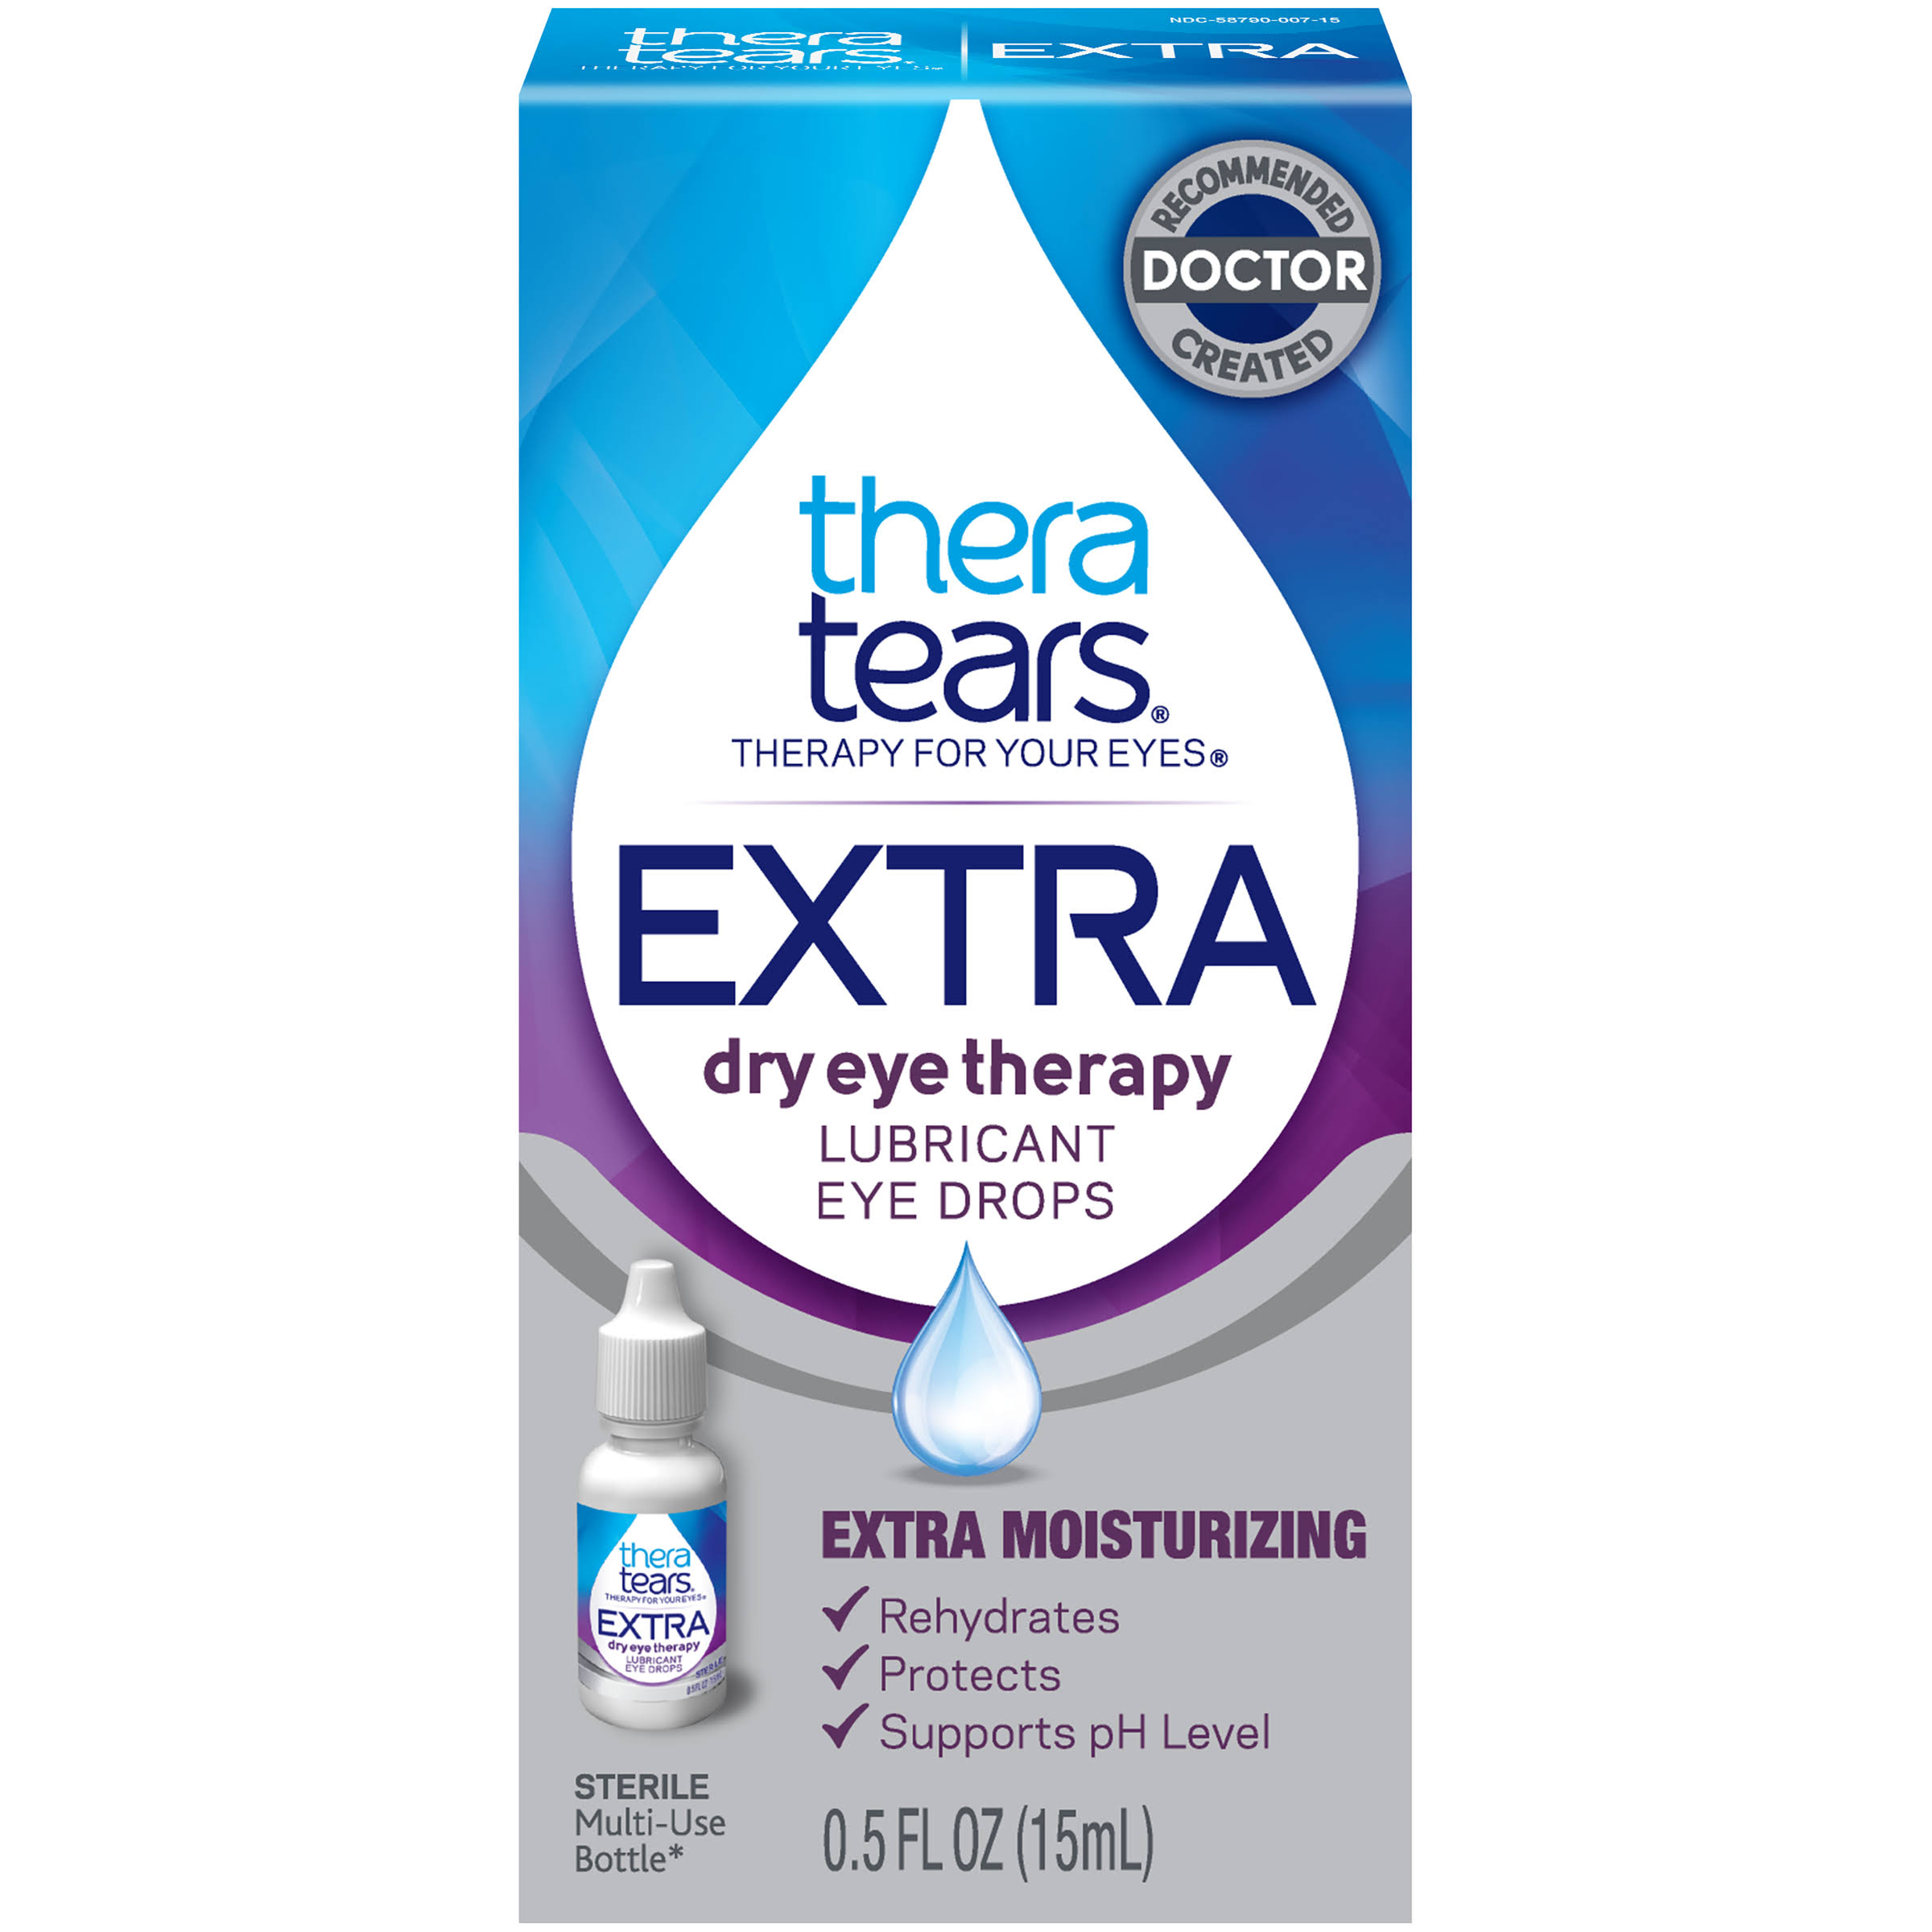 TheraTears Extra Dry Eye Therapy Lubricant Eye Drops 0.5 fl oz (15 ml)